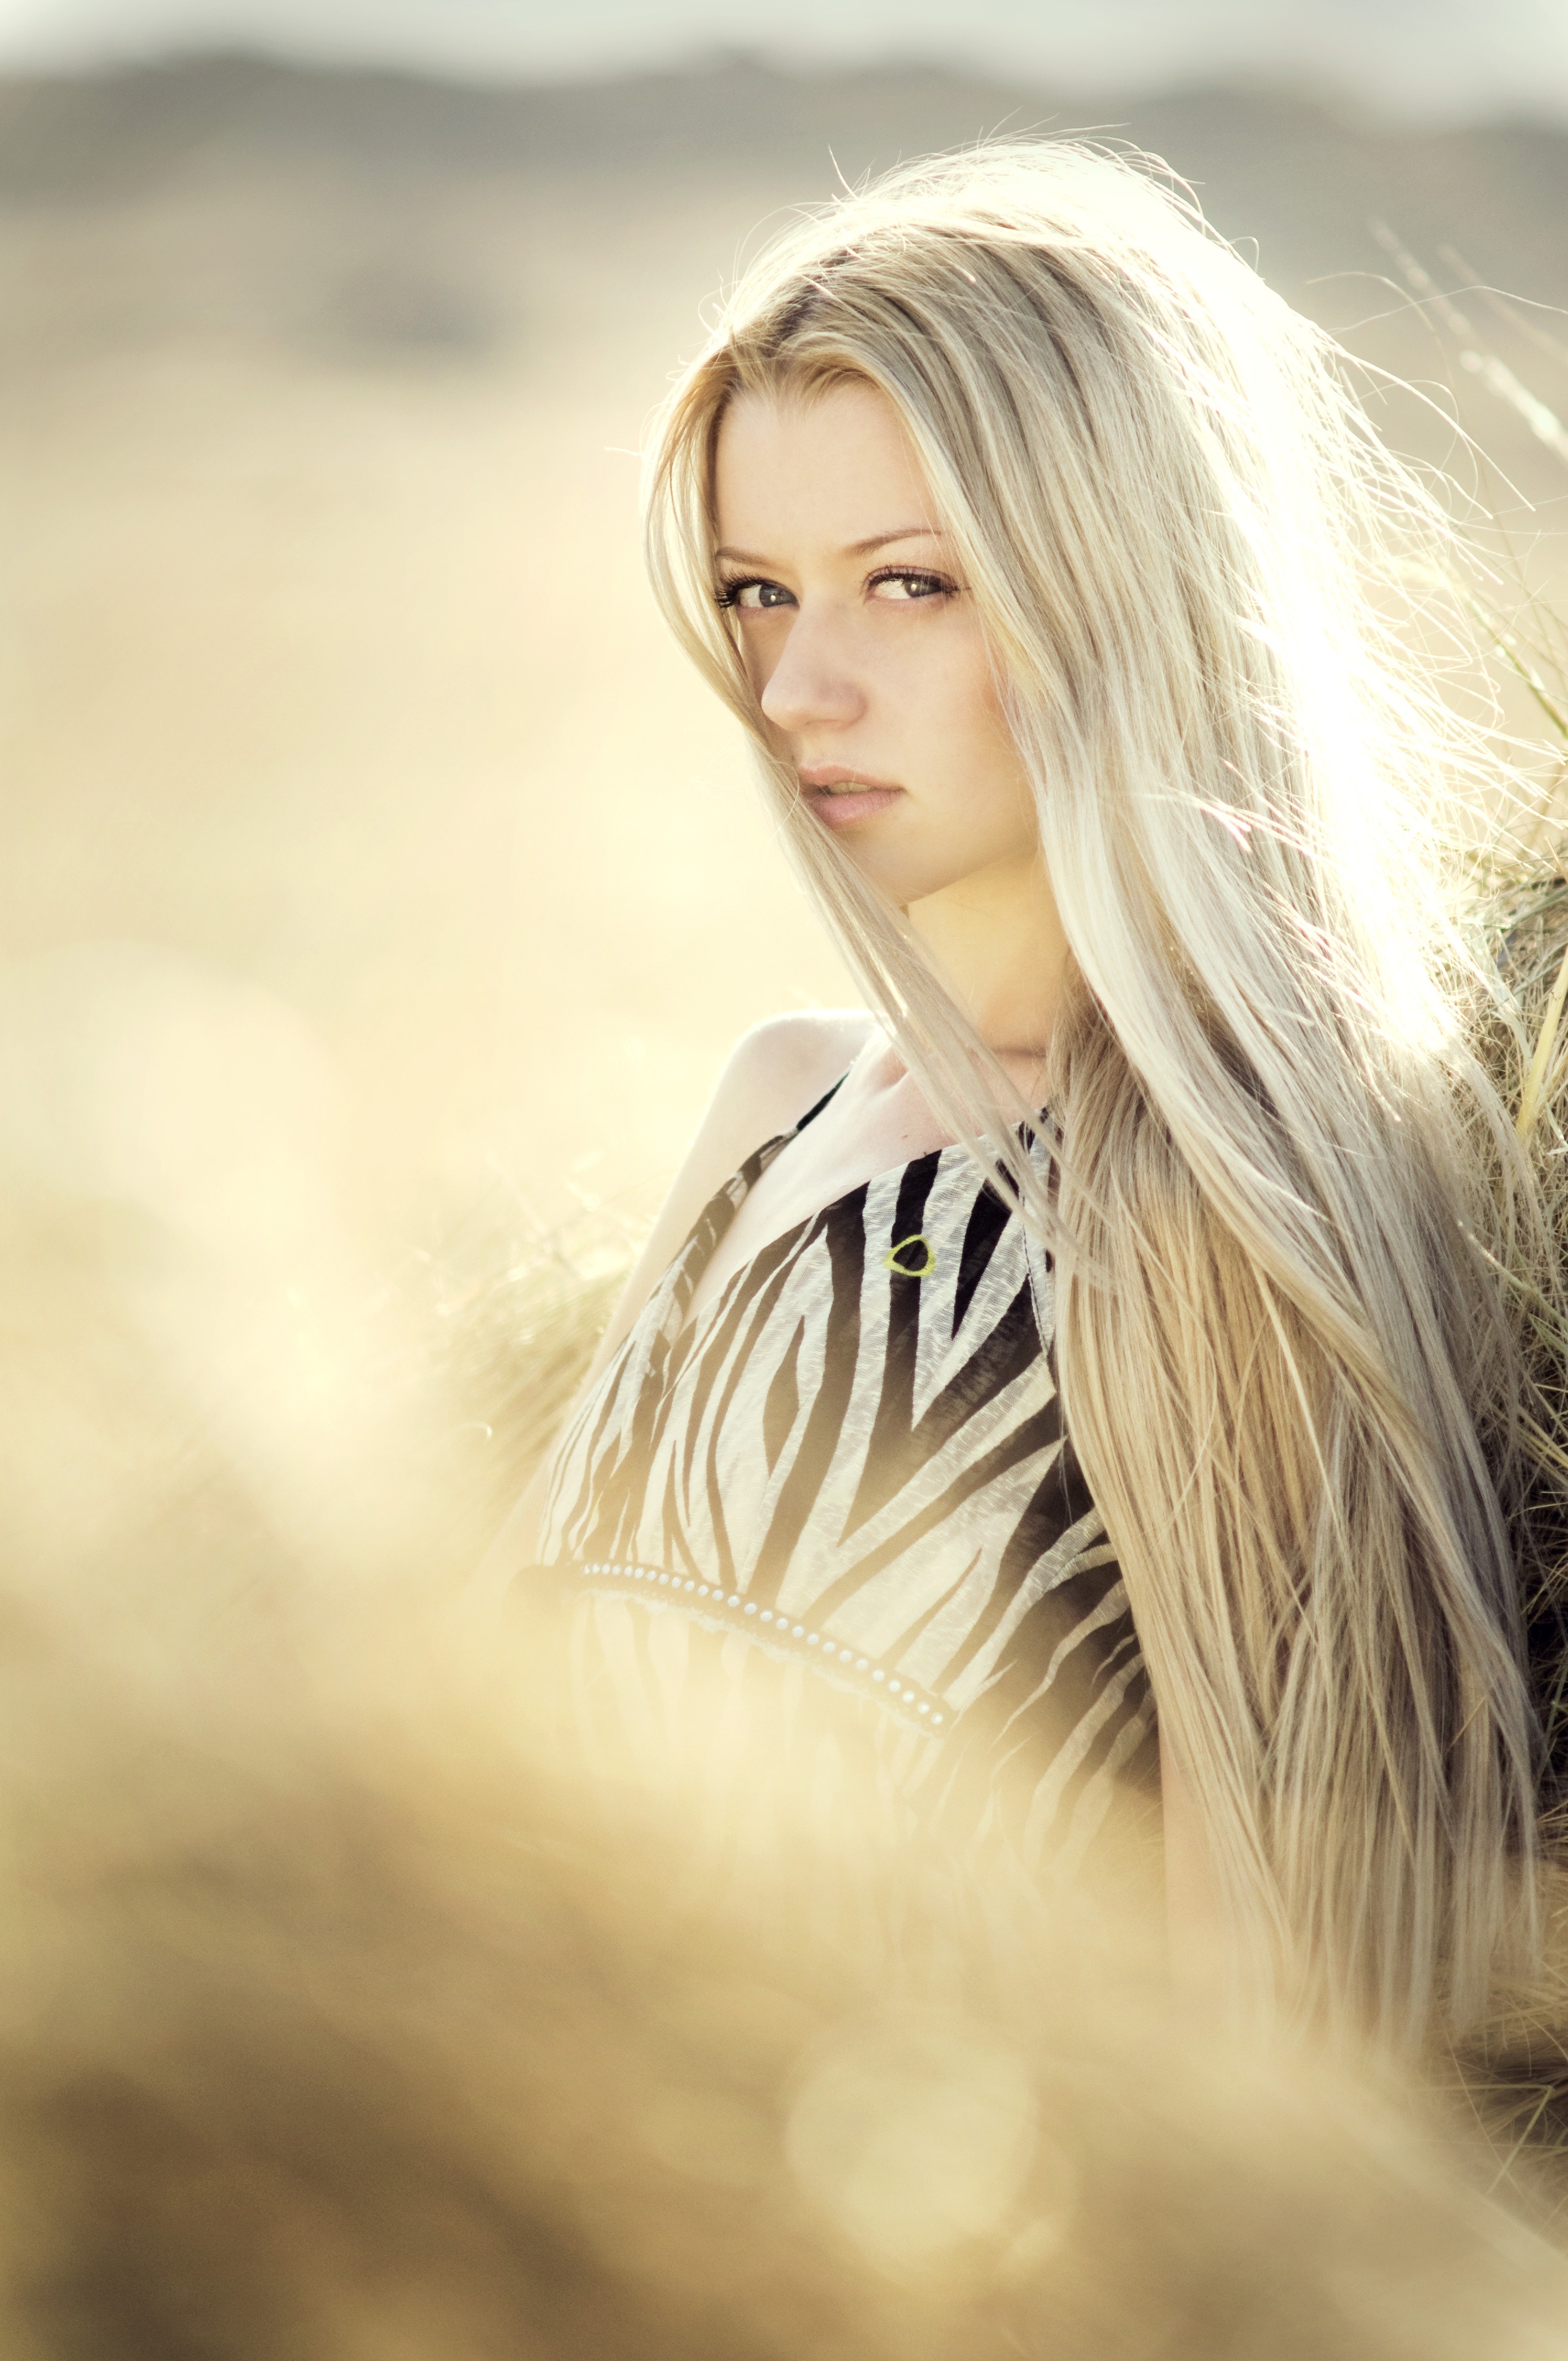 Free Photo Blonde Haired Woman In Open Field Photoshoot During